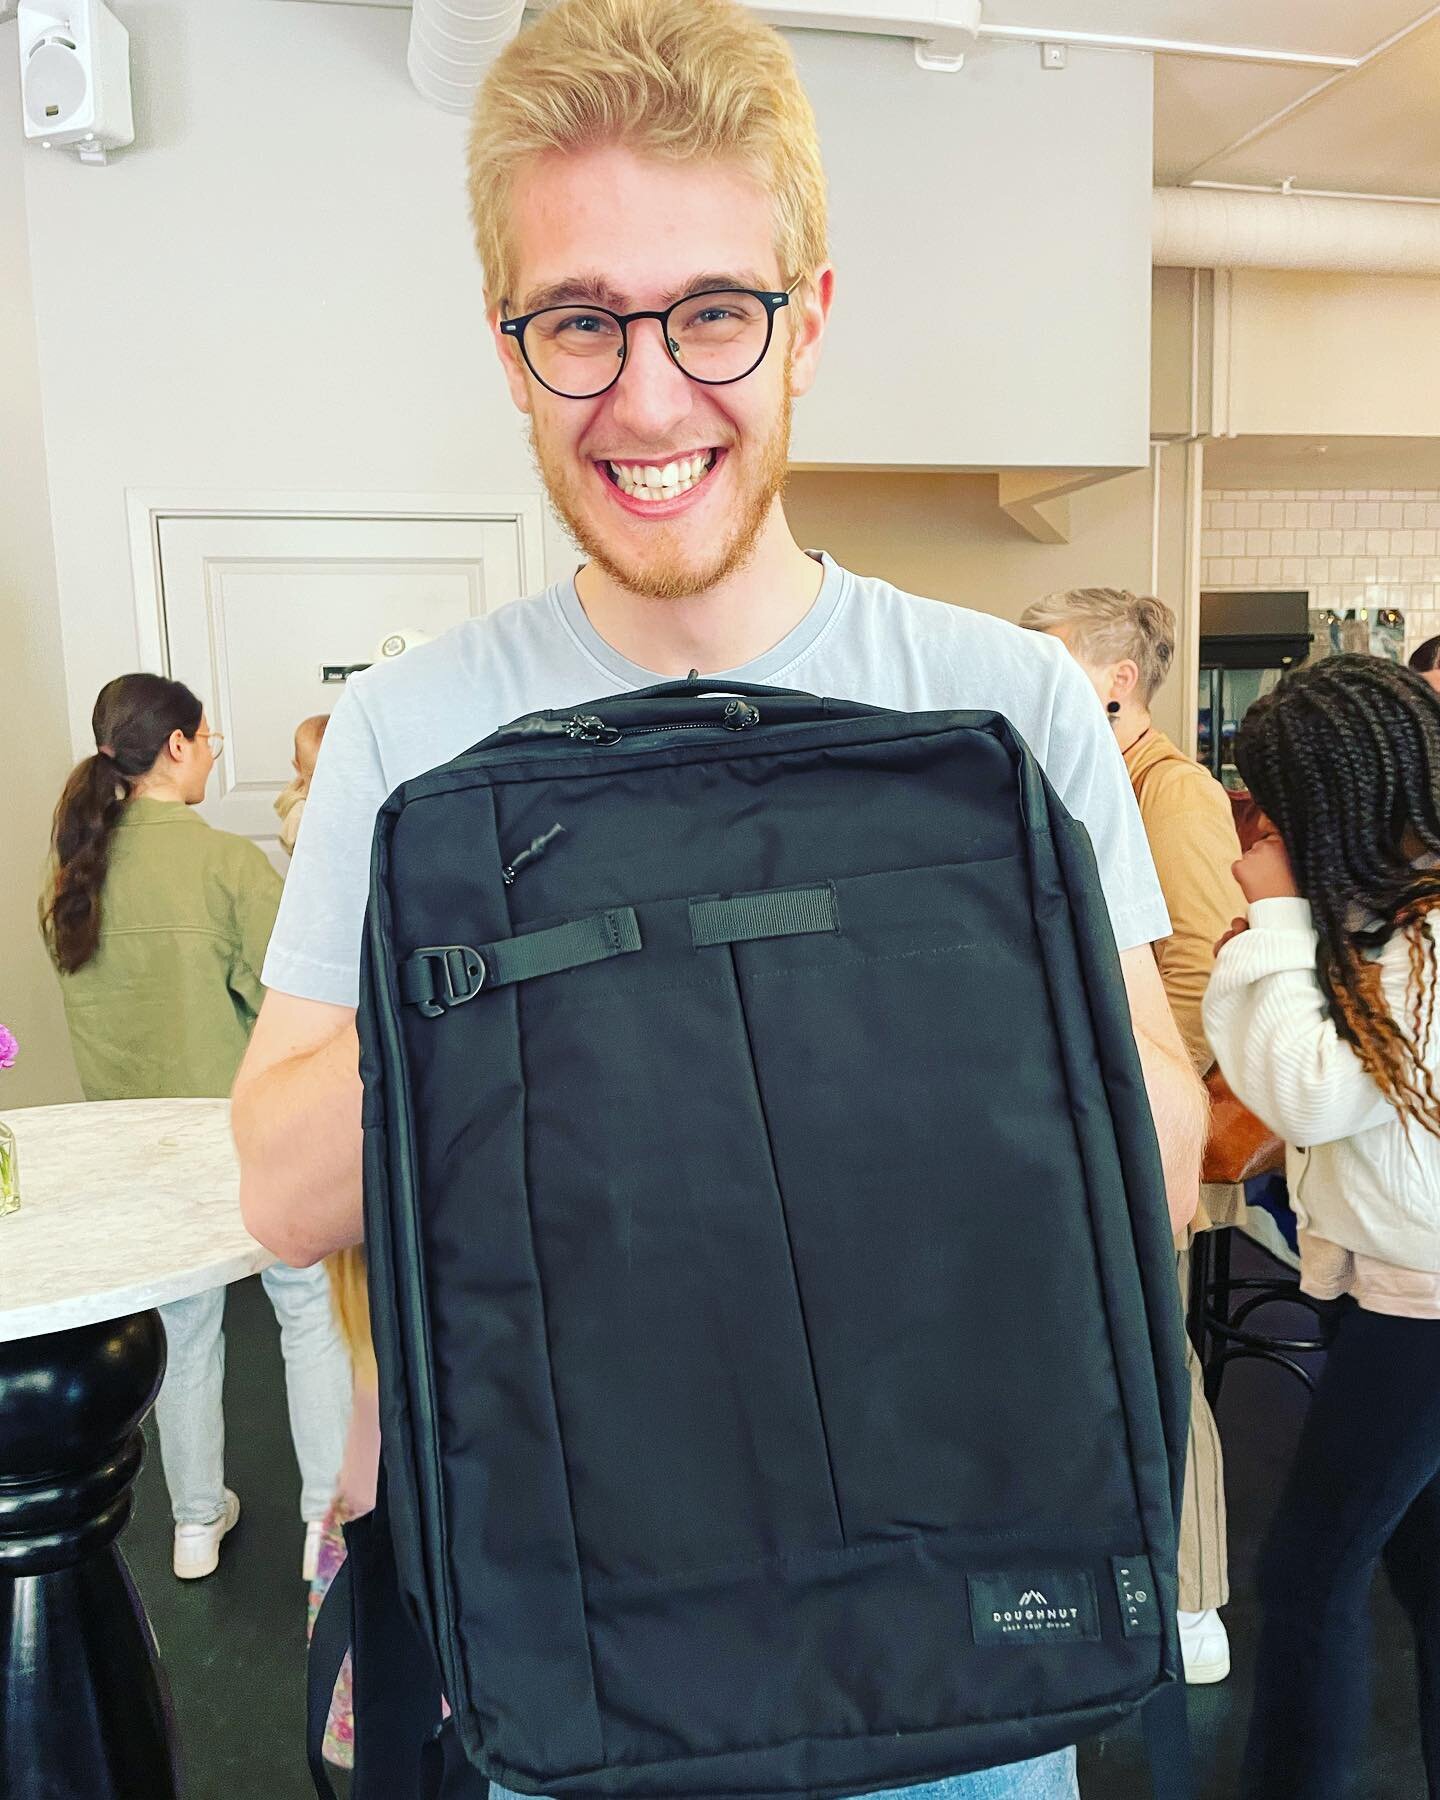 YOU could be the lucky winner of this backpack! Enter the giveaway now 🤩🏆

#MBSgiveawayACT